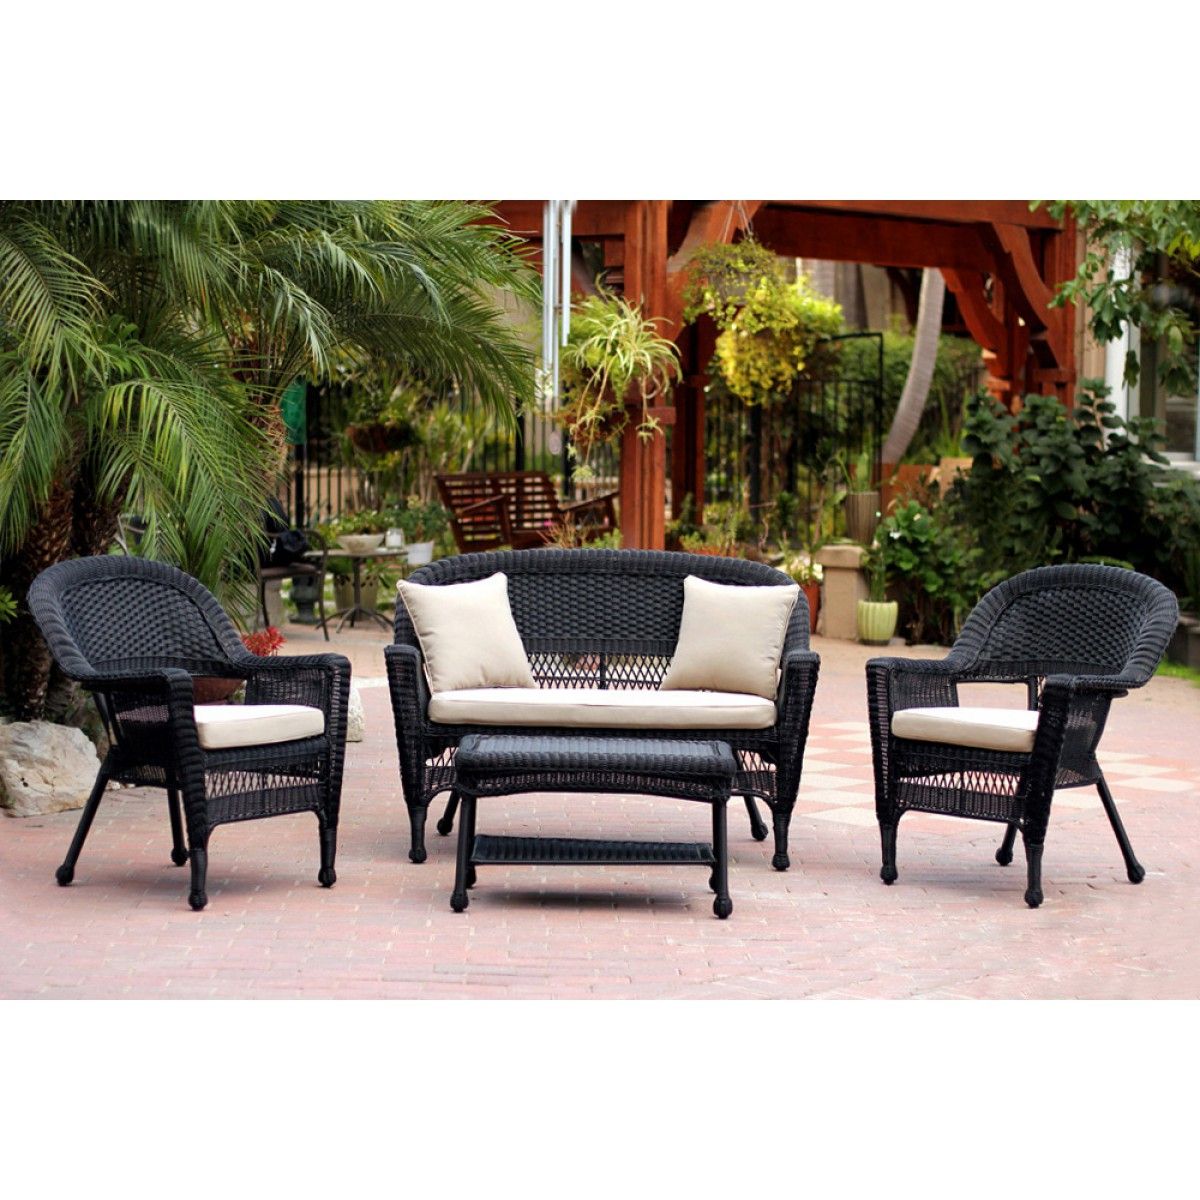 Black And Tan Rattan Coffee Tables Inside Well Liked 4pc Black Wicker Conversation Set – Tan Cushion (View 3 of 20)